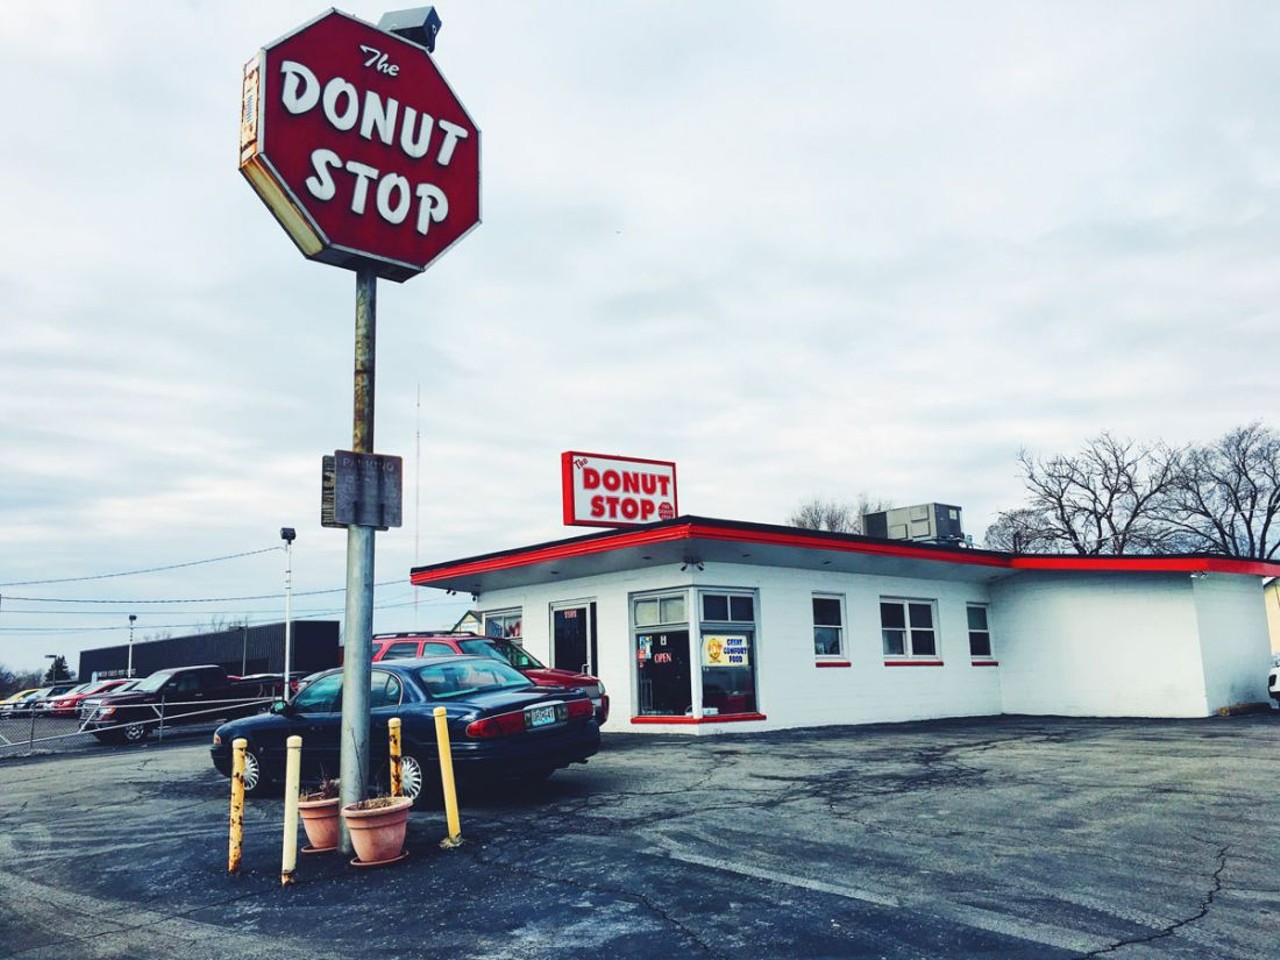 Throughout its long history, Donut Stop has been recognized both locally and nationally for these amazing donuts.